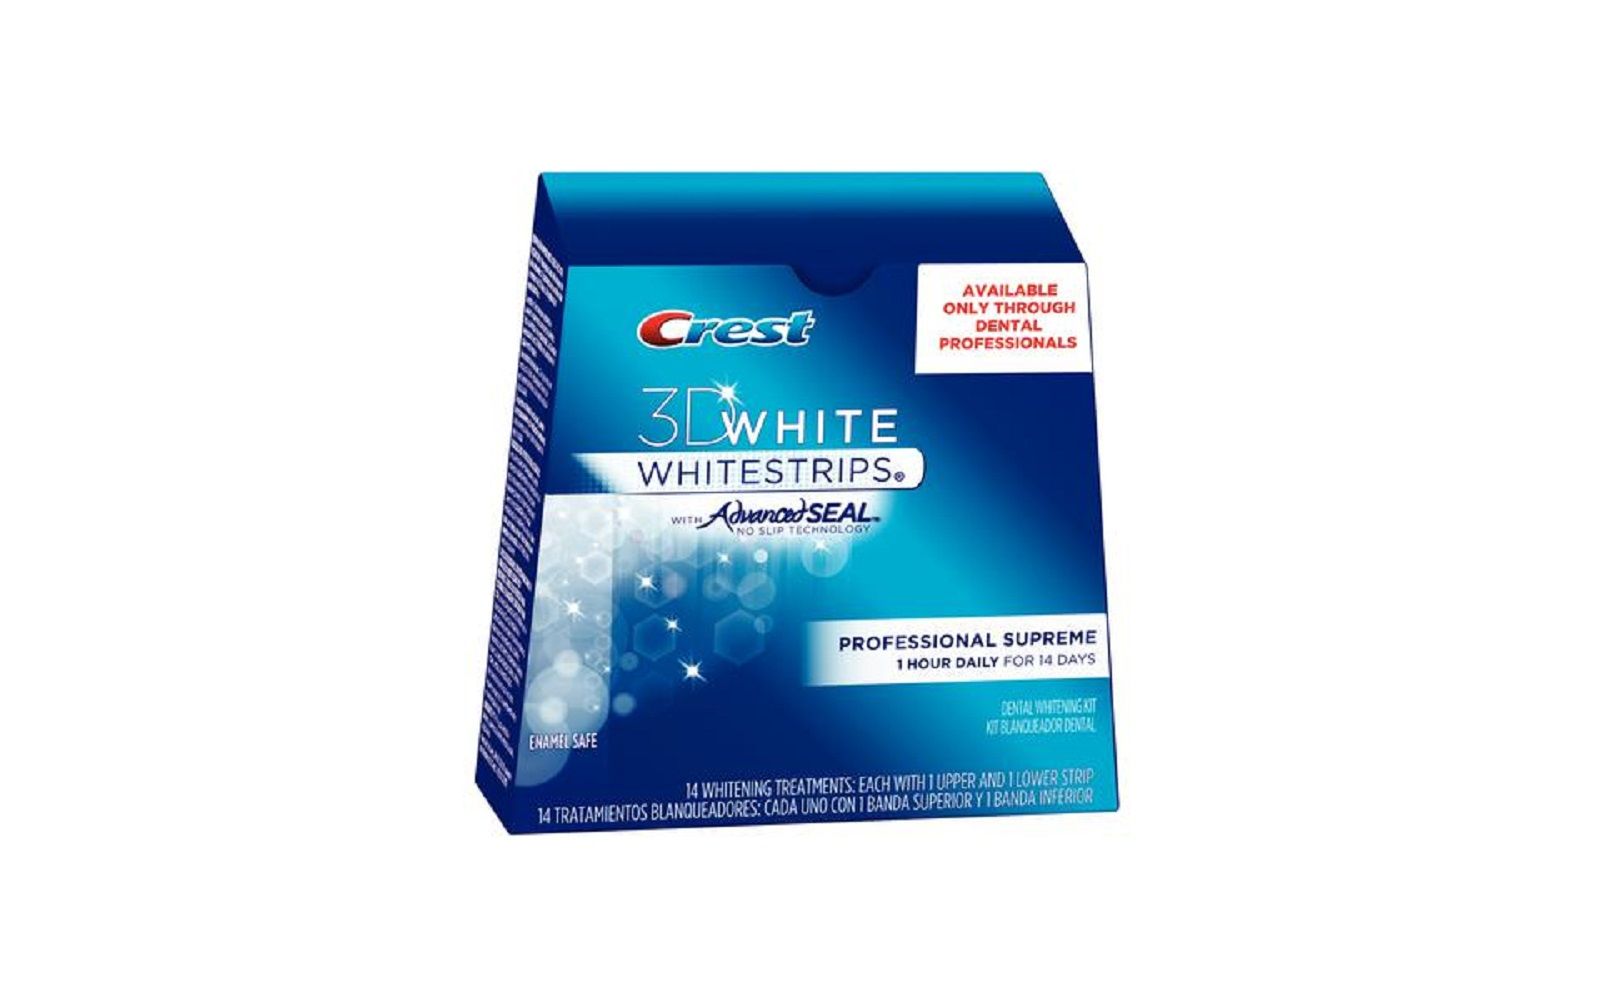 Crest® 3d white whitestrips® with advanced seal professional supreme